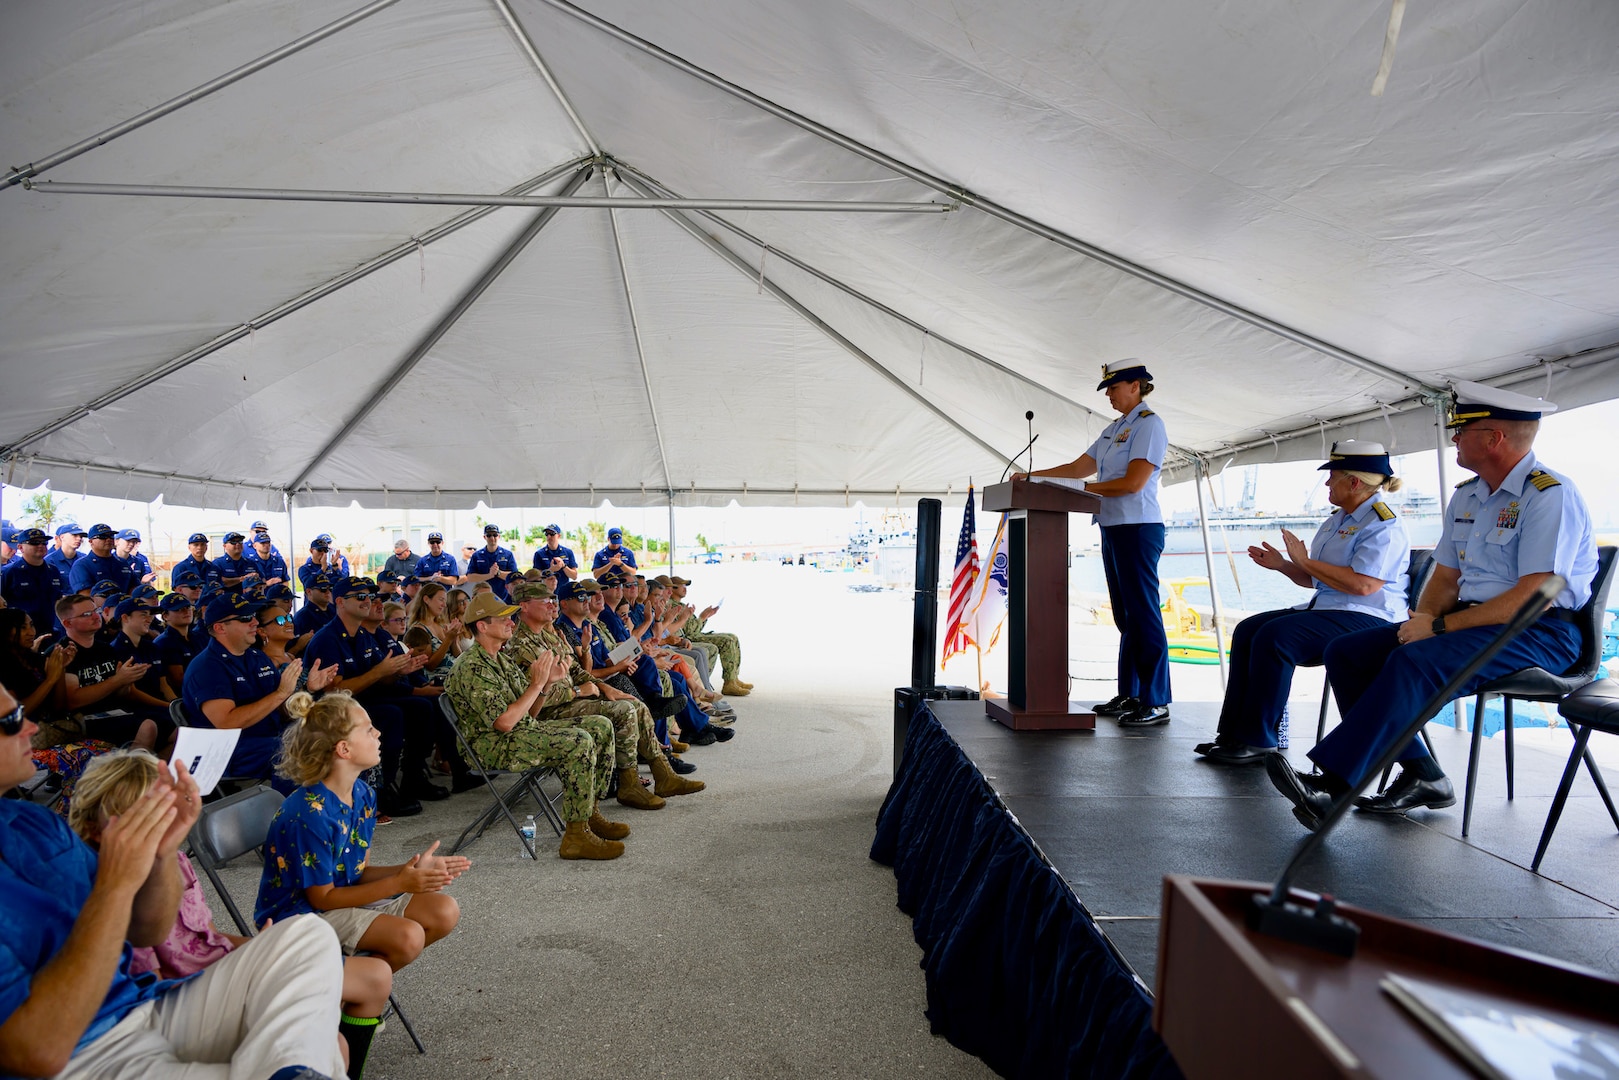 The U.S. Coast Guard holds an establishment for U.S. Coast Guard Base Guam on Nov. 8, 2023, in a ceremony presided over by Rear Adm. Carola List, commander of Operational Logistics Command. Led by Cmdr. Dana Hiatt, Base Guam, will be pivotal toward enhancing the U.S. Coast Guard's mission support logistics in the region. This strategic move aligns with the Service's commitment to increase mission support throughout Oceania. Given Guam's vital importance to national security, this initiative takes center stage. (U.S. Coast Guard photo by David Lau)